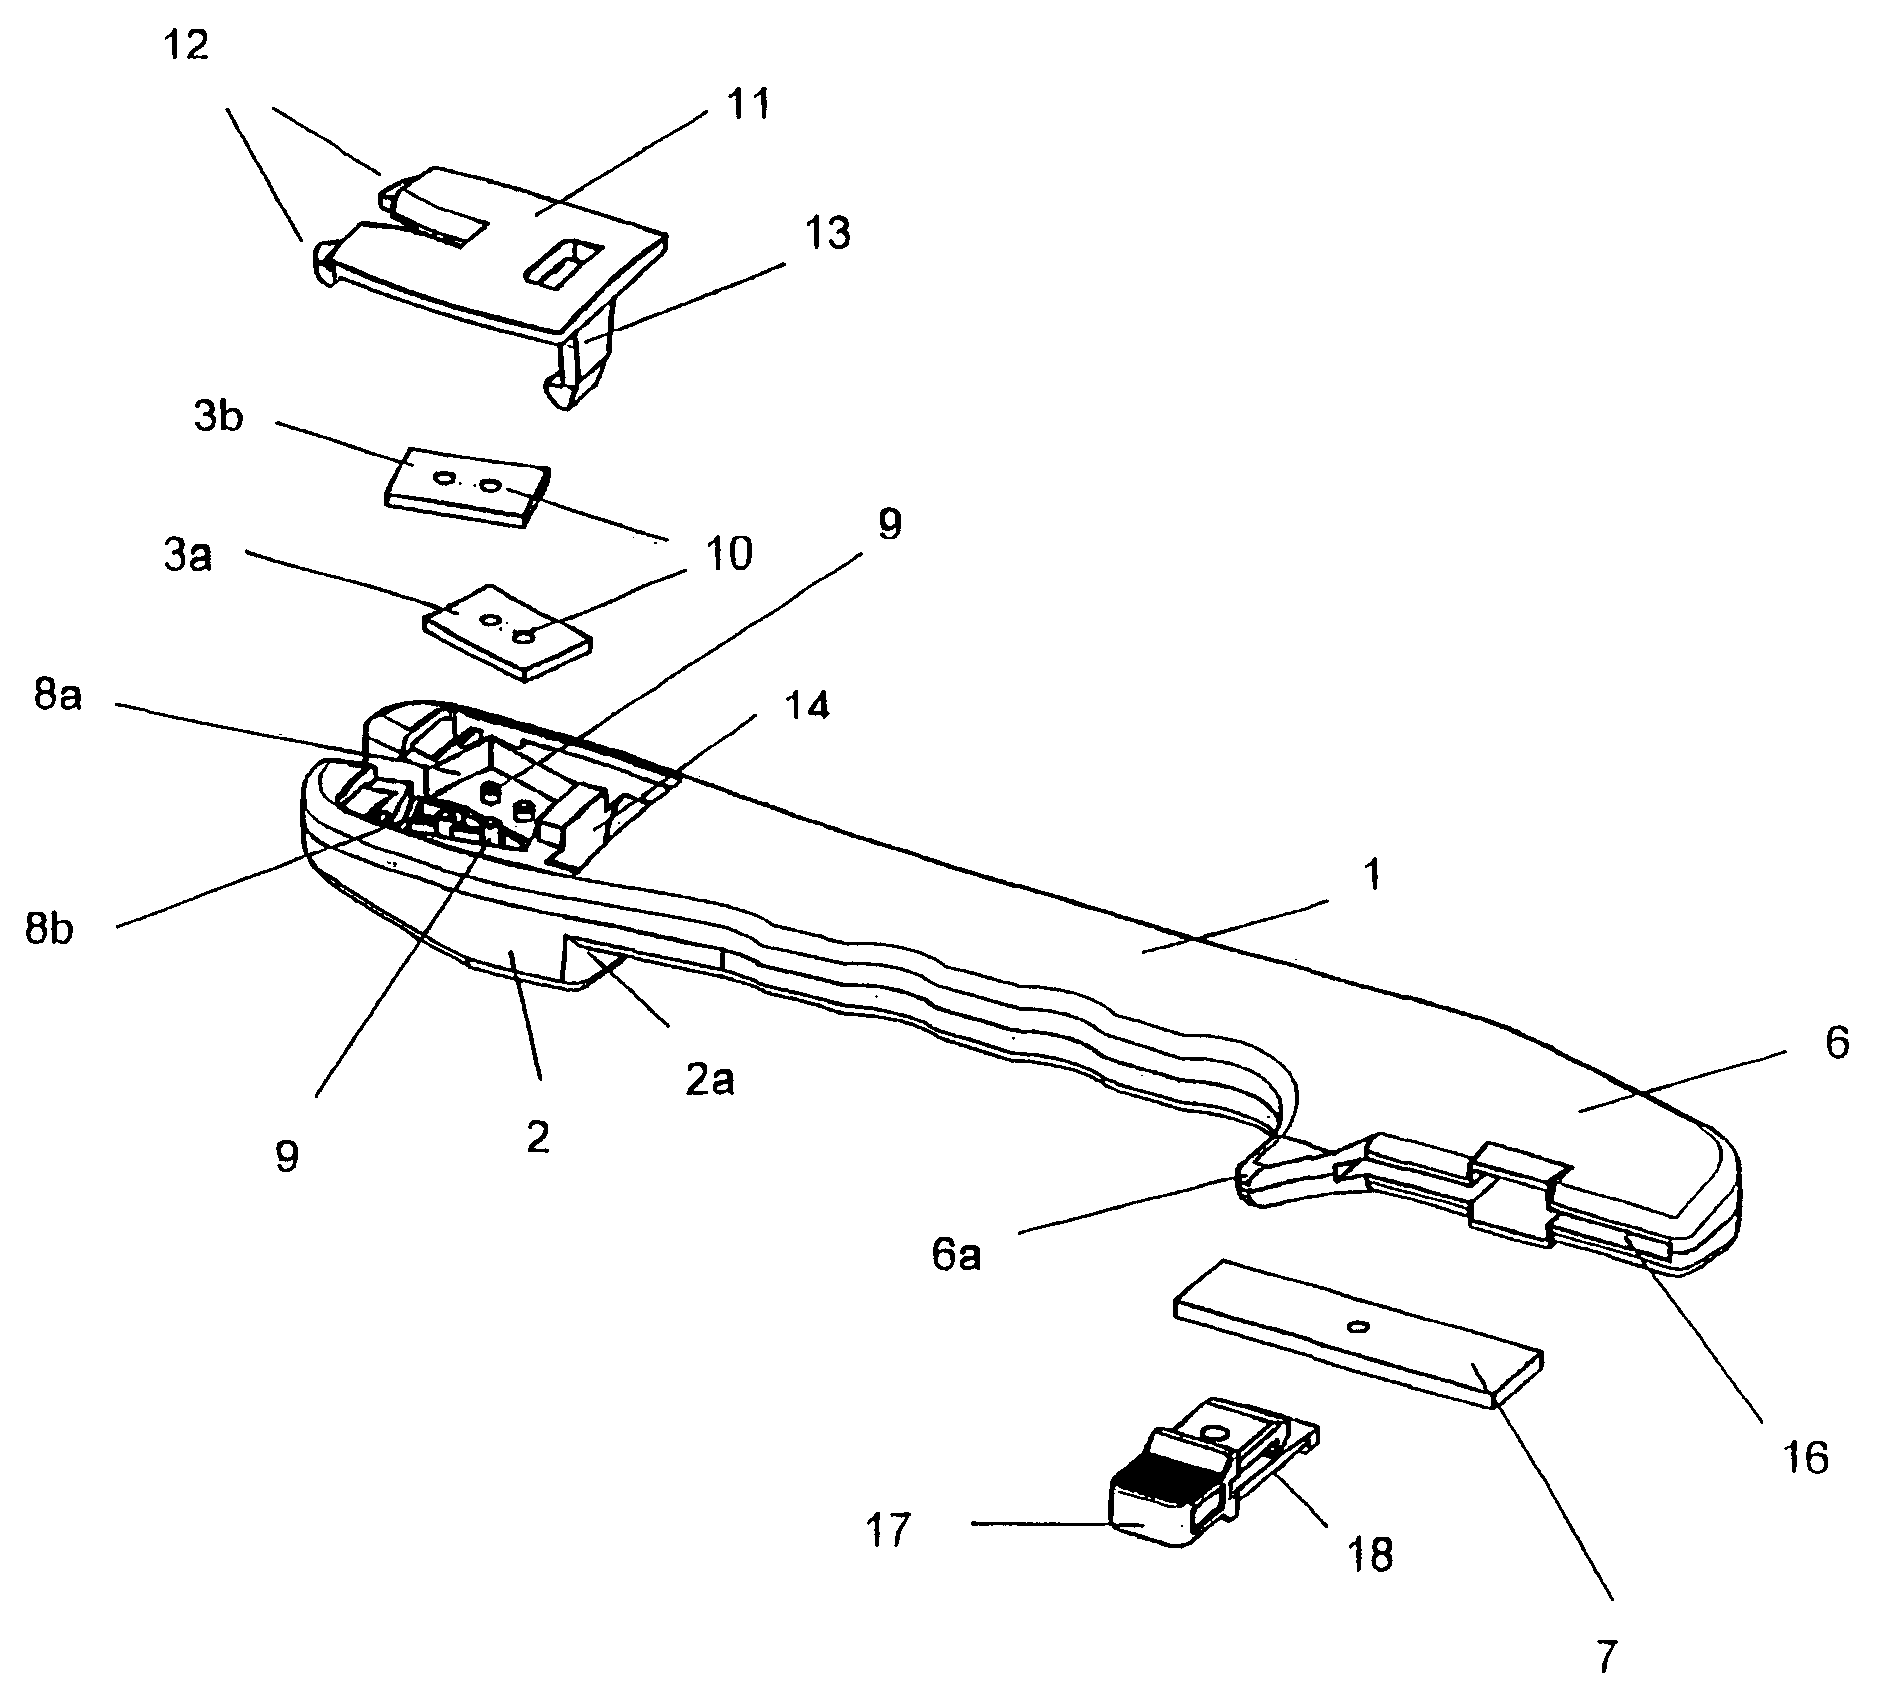 Device for manually sharpening knives and other blades, comprising interchangeably mounted hard metal plates